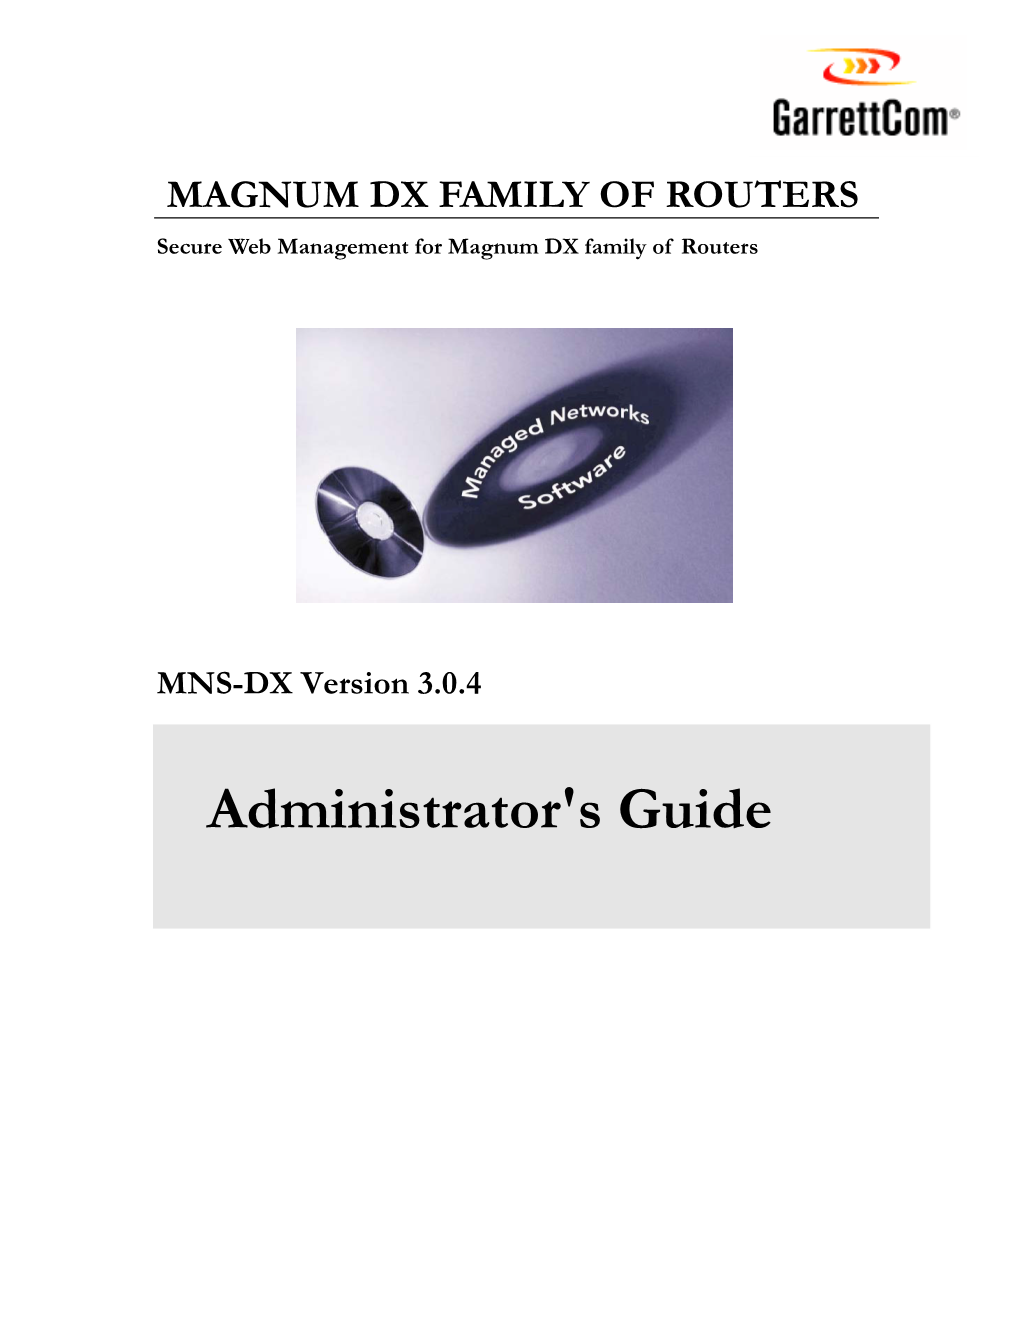 MAGNUM DX FAMILY of ROUTERS Secure Web Management for Magnum DX Family of Routers